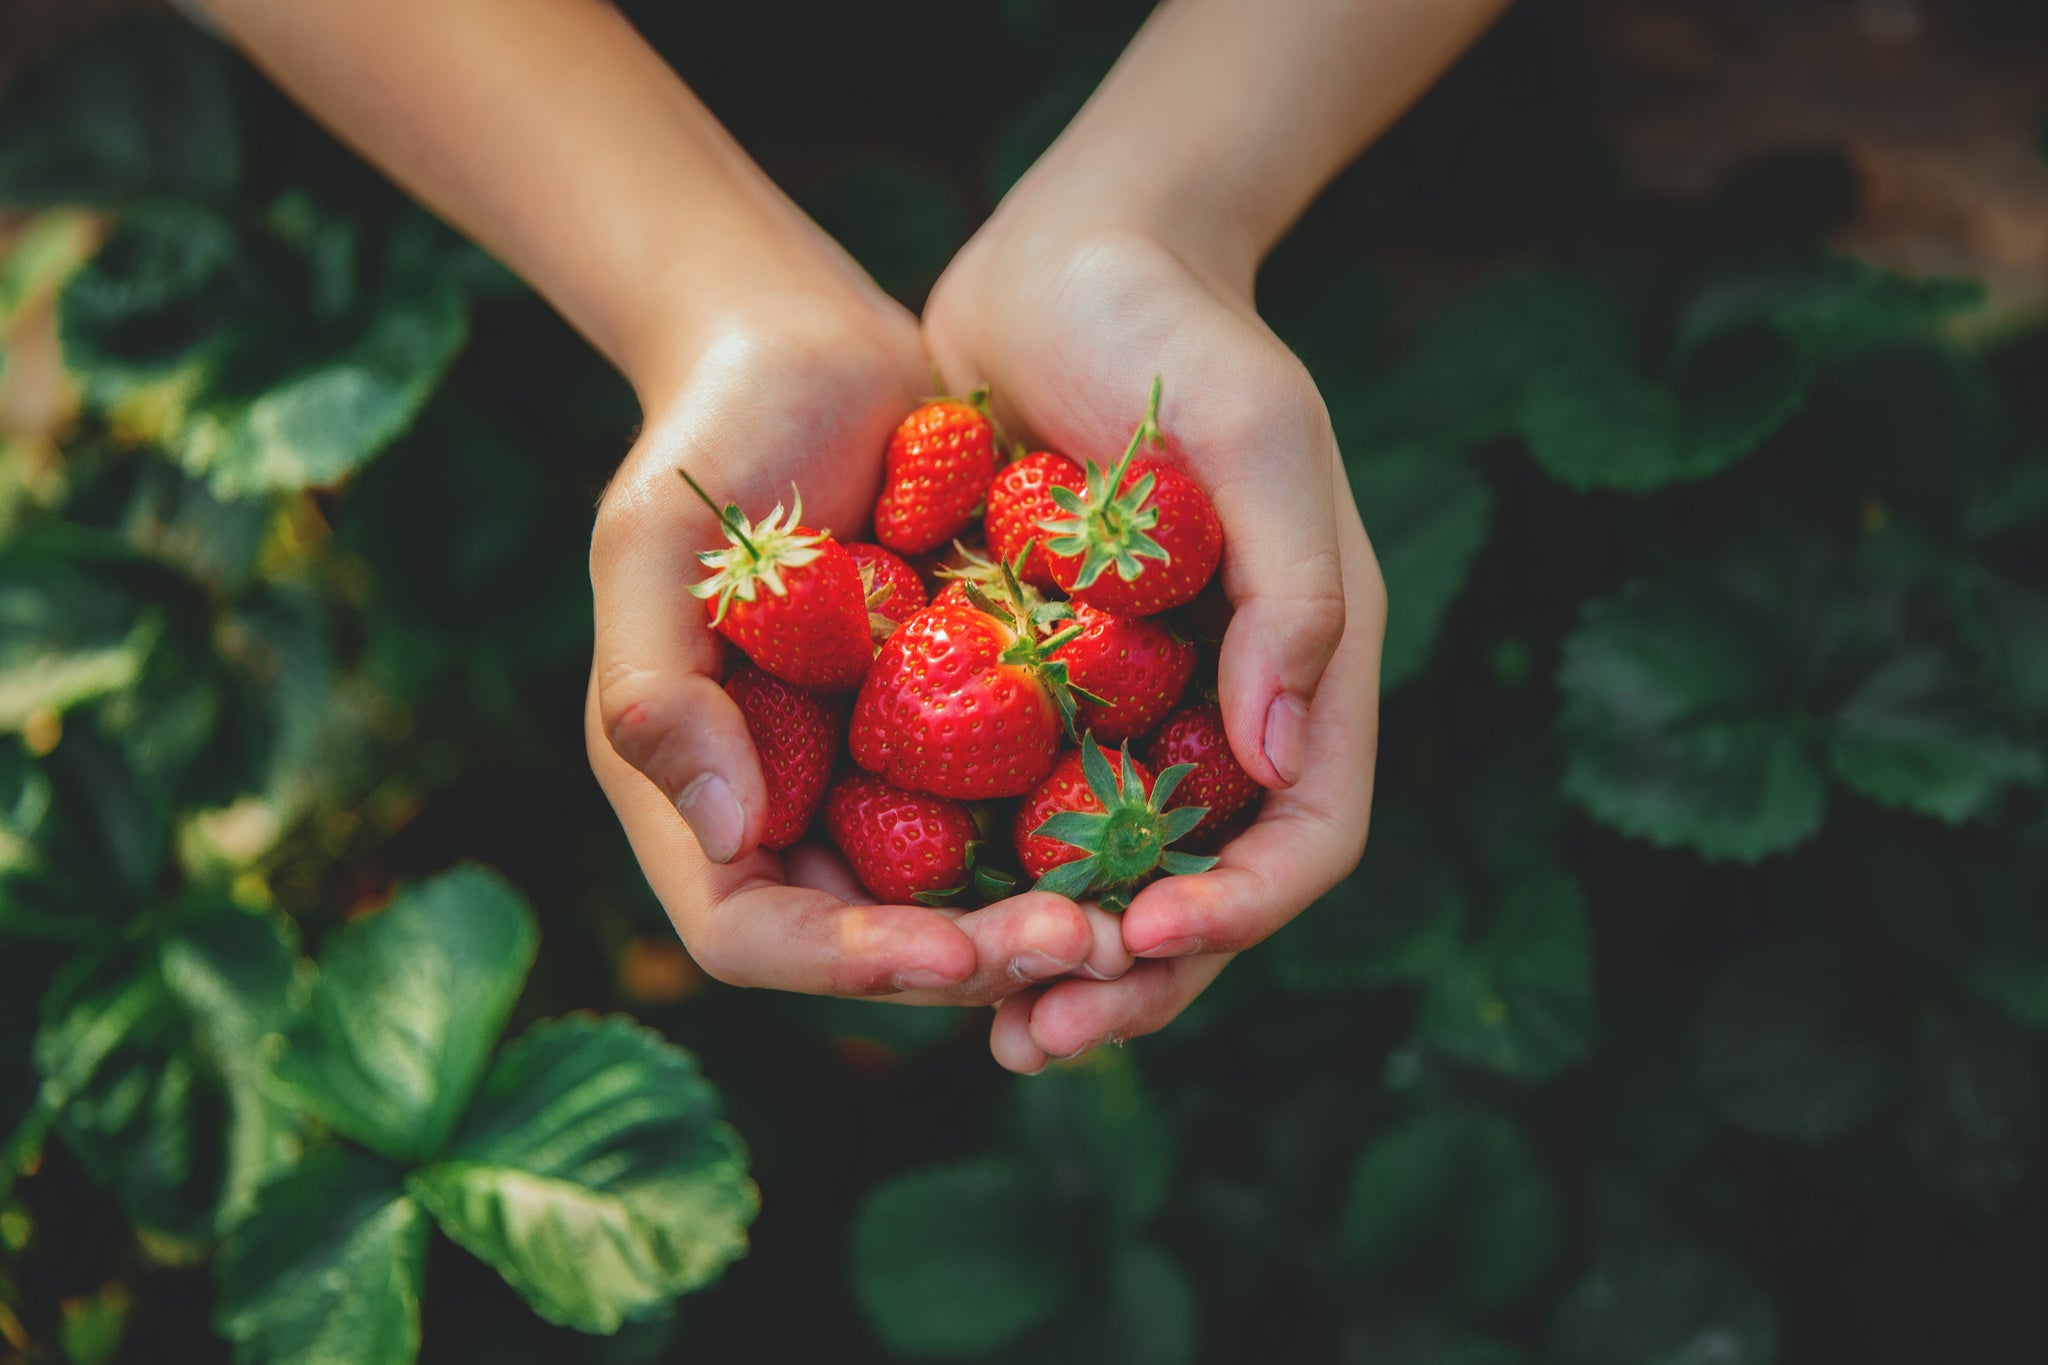 Girl hands holding a handful of ripe, red strawberries